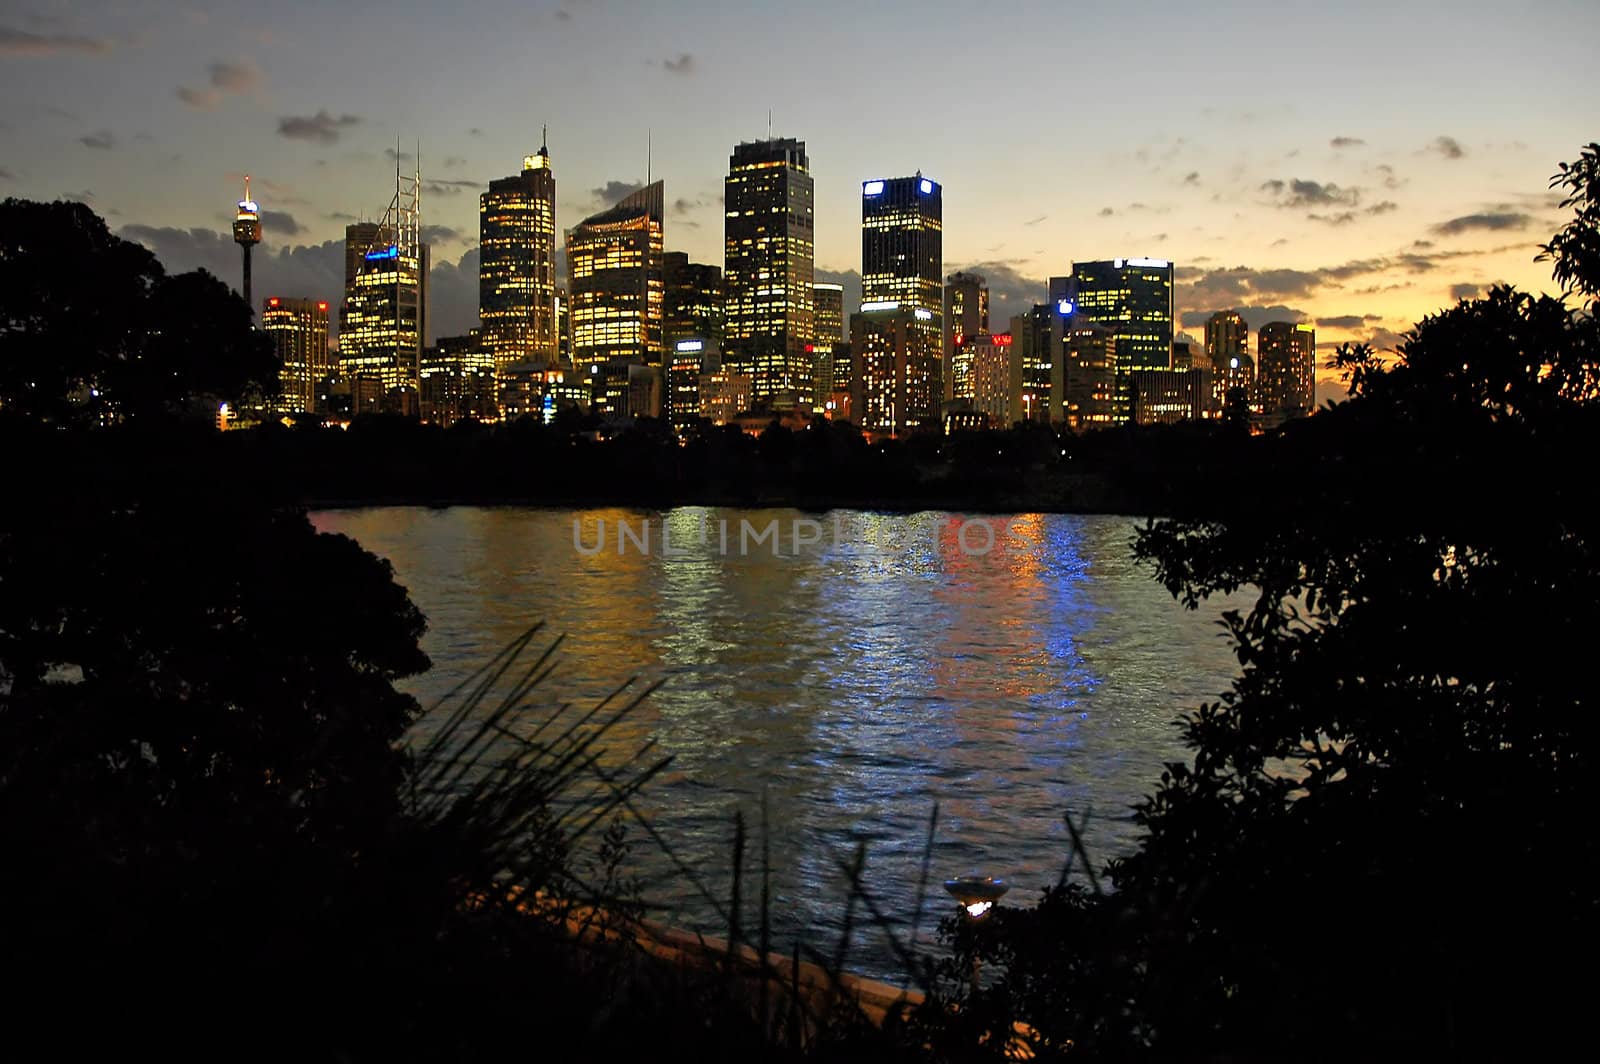 sydney night scenery, lights reflection in water, trees silhouettes in foreground, photo taken from Botanic Gardens, Farm Cove in foreground